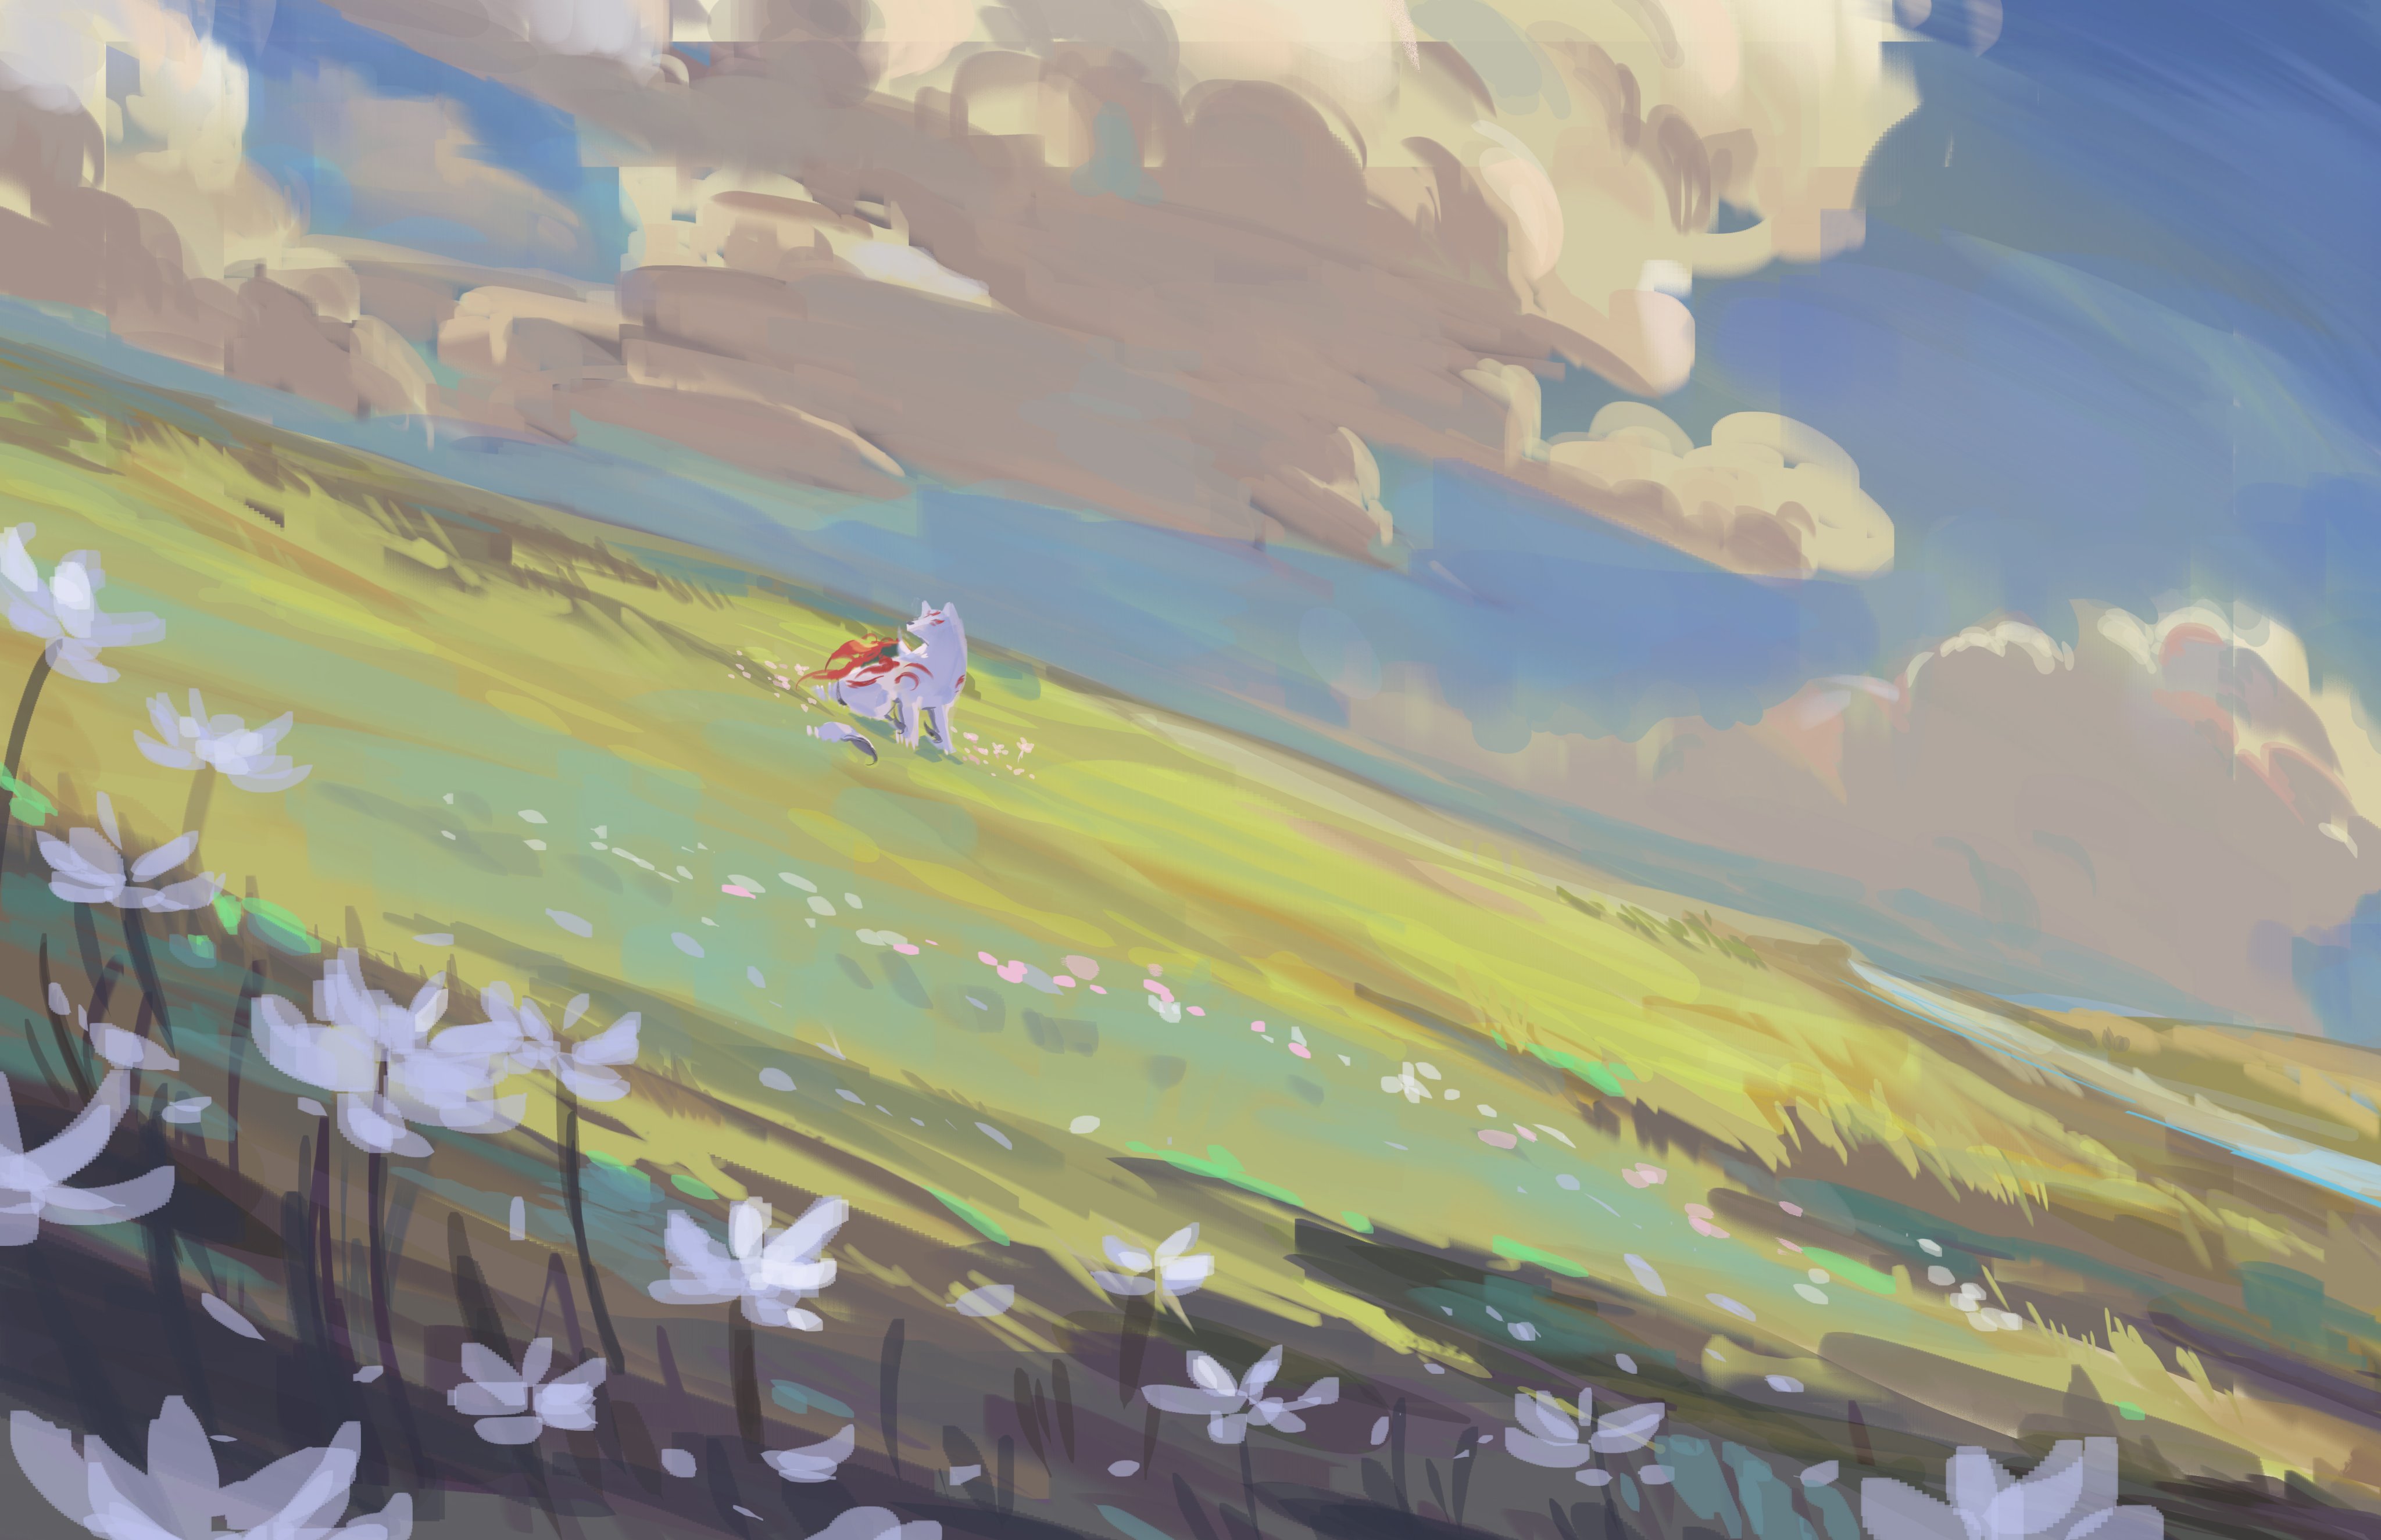 Okami Amaterasu Wolf Video Game Art Video Games Grass Flowers Clouds Field Video Game Characters Vid 4096x2650